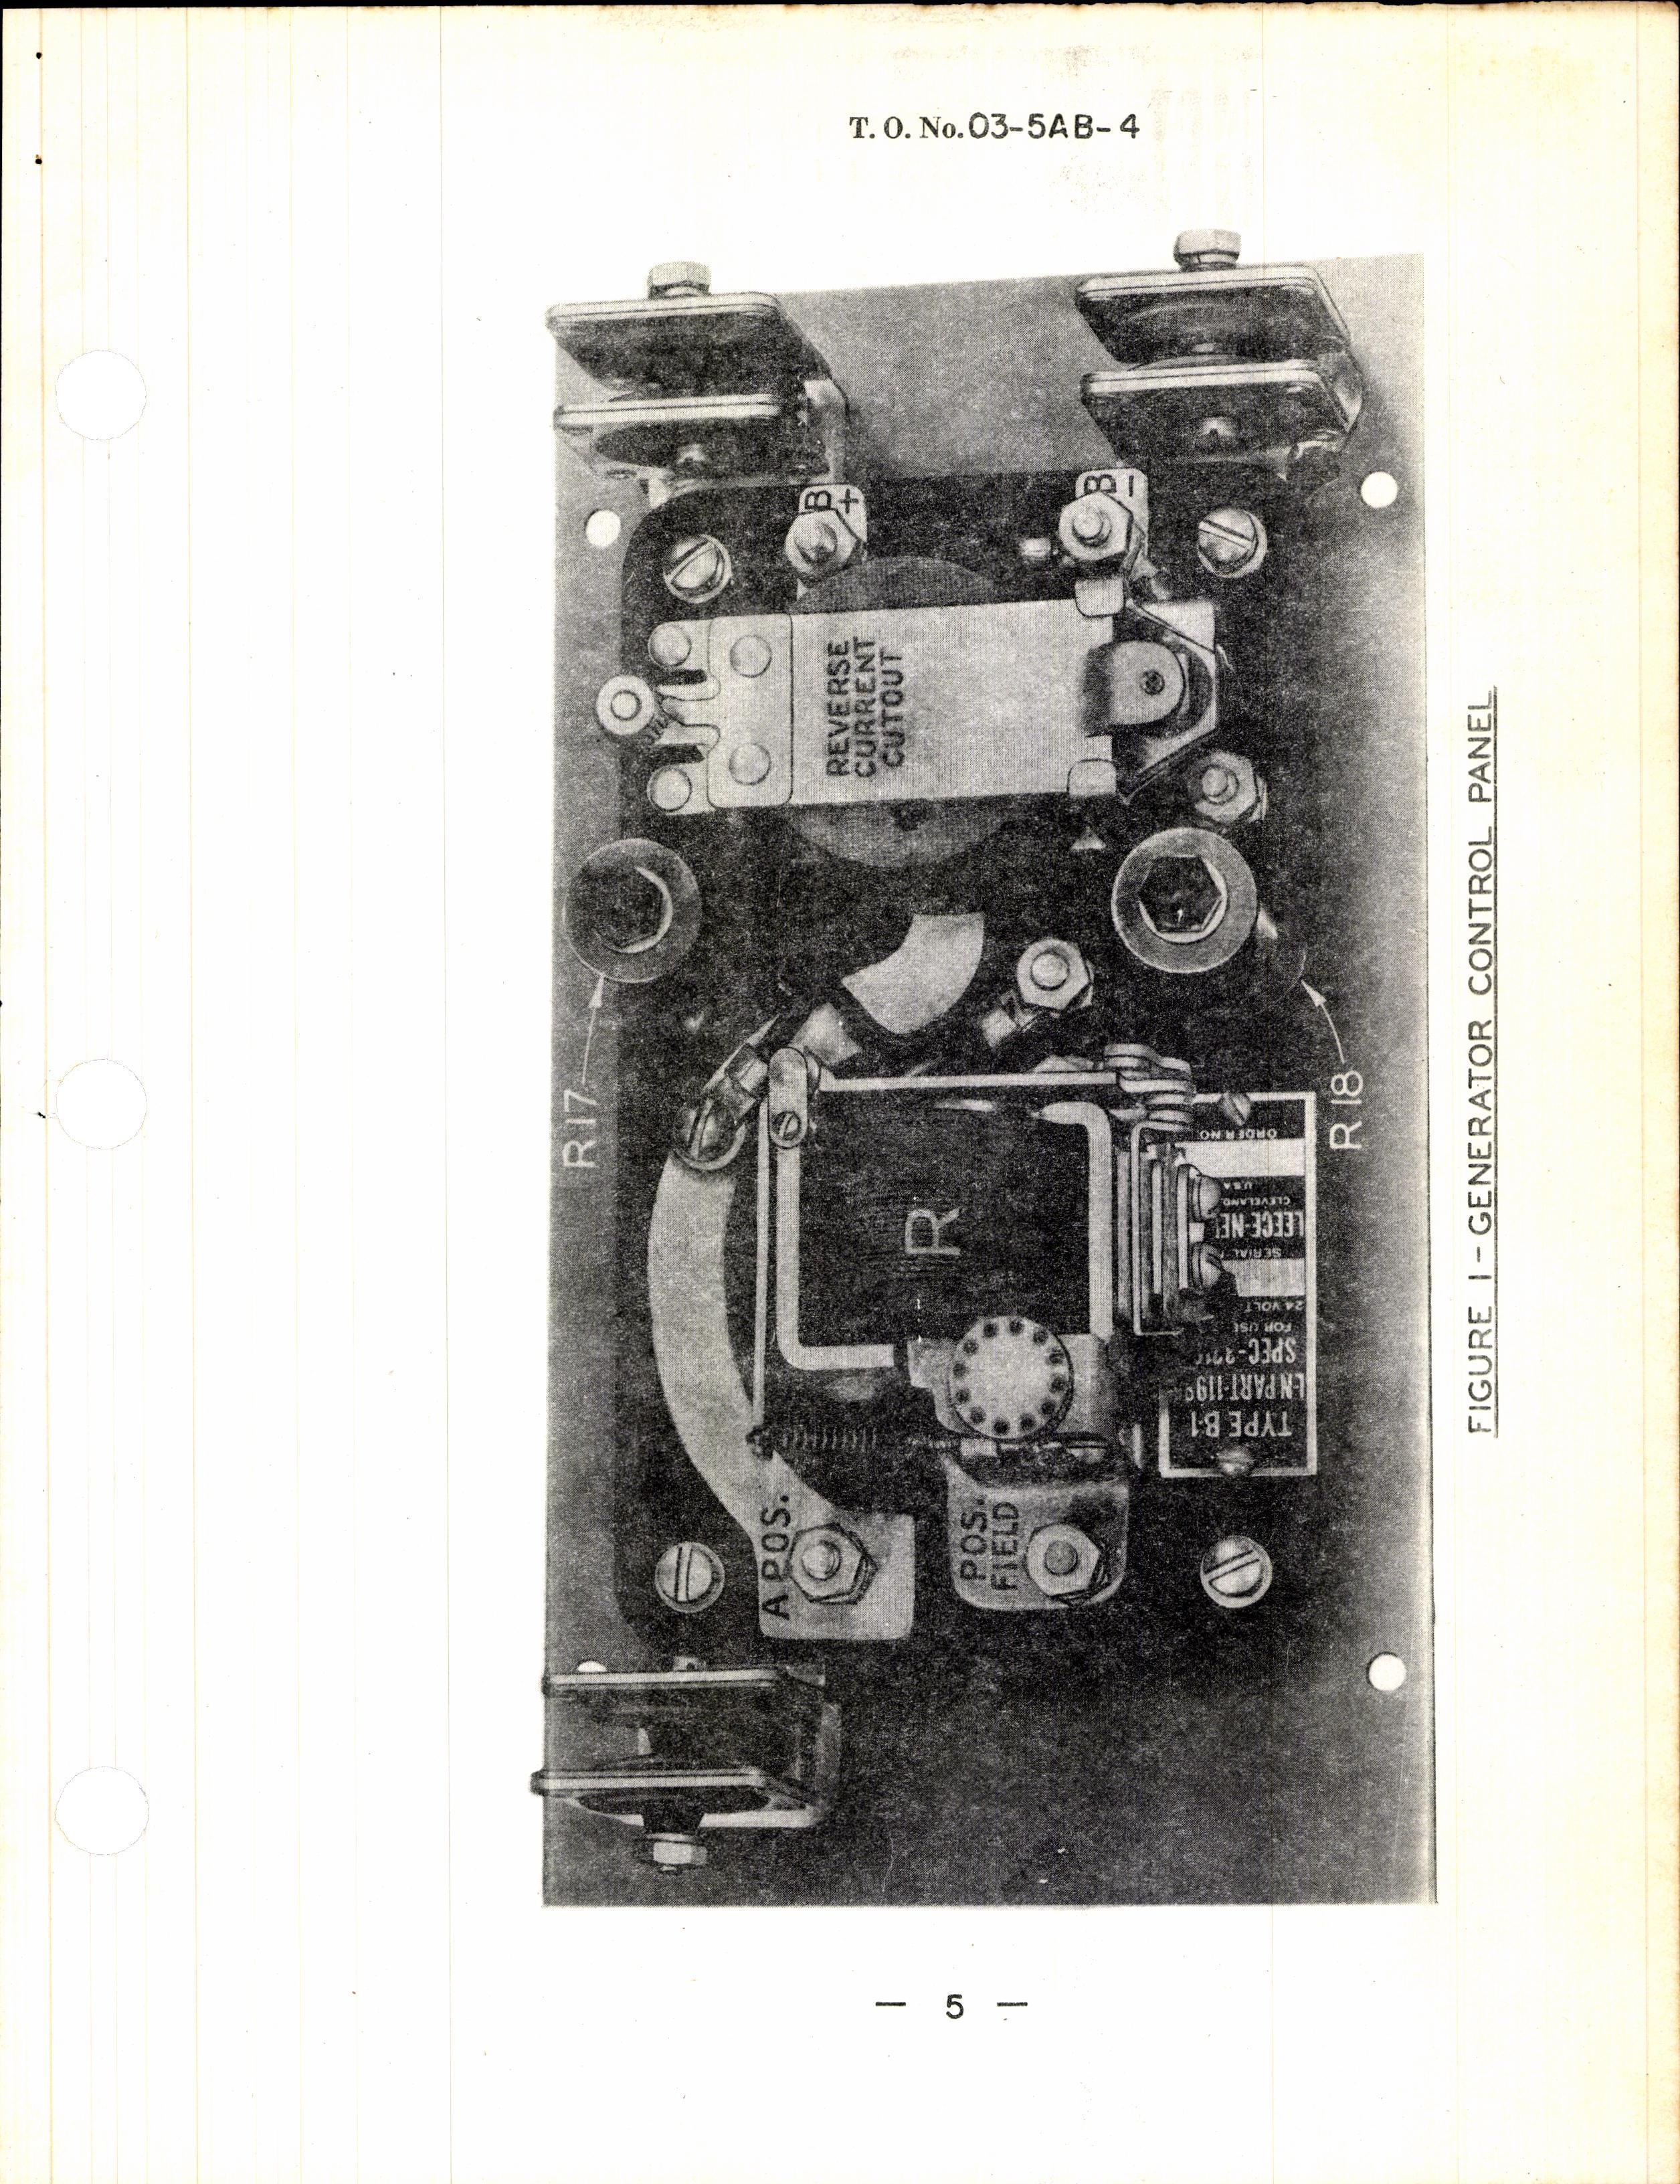 Sample page 7 from AirCorps Library document: Operation, Service, & Overhaul Instructions with Parts Catalog for Leece-Neville Type B-1A Generator Control Panel